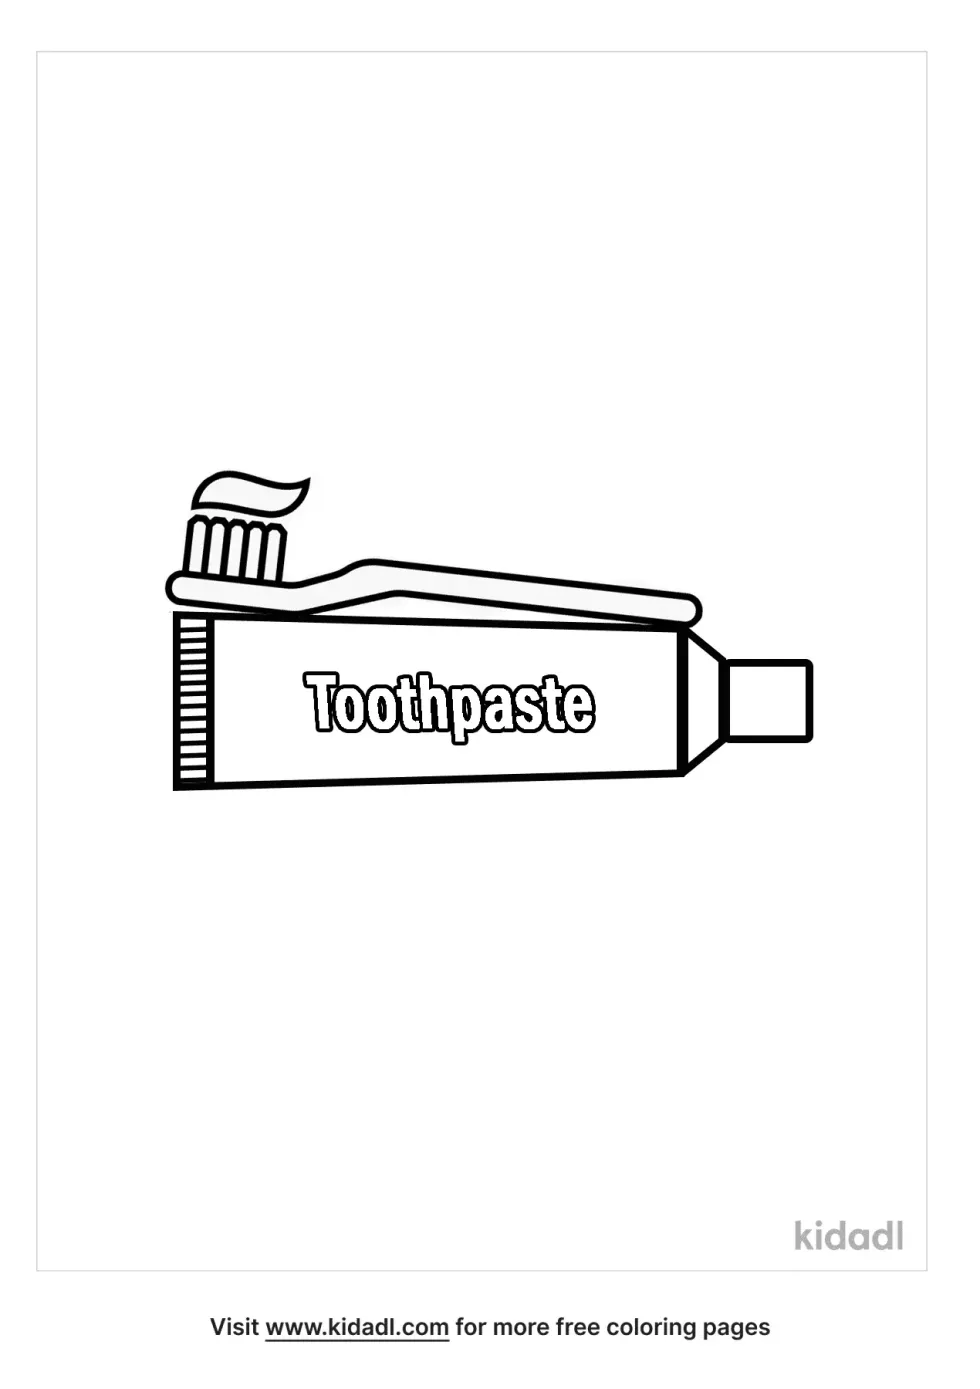 Toothpaste Coloring Page